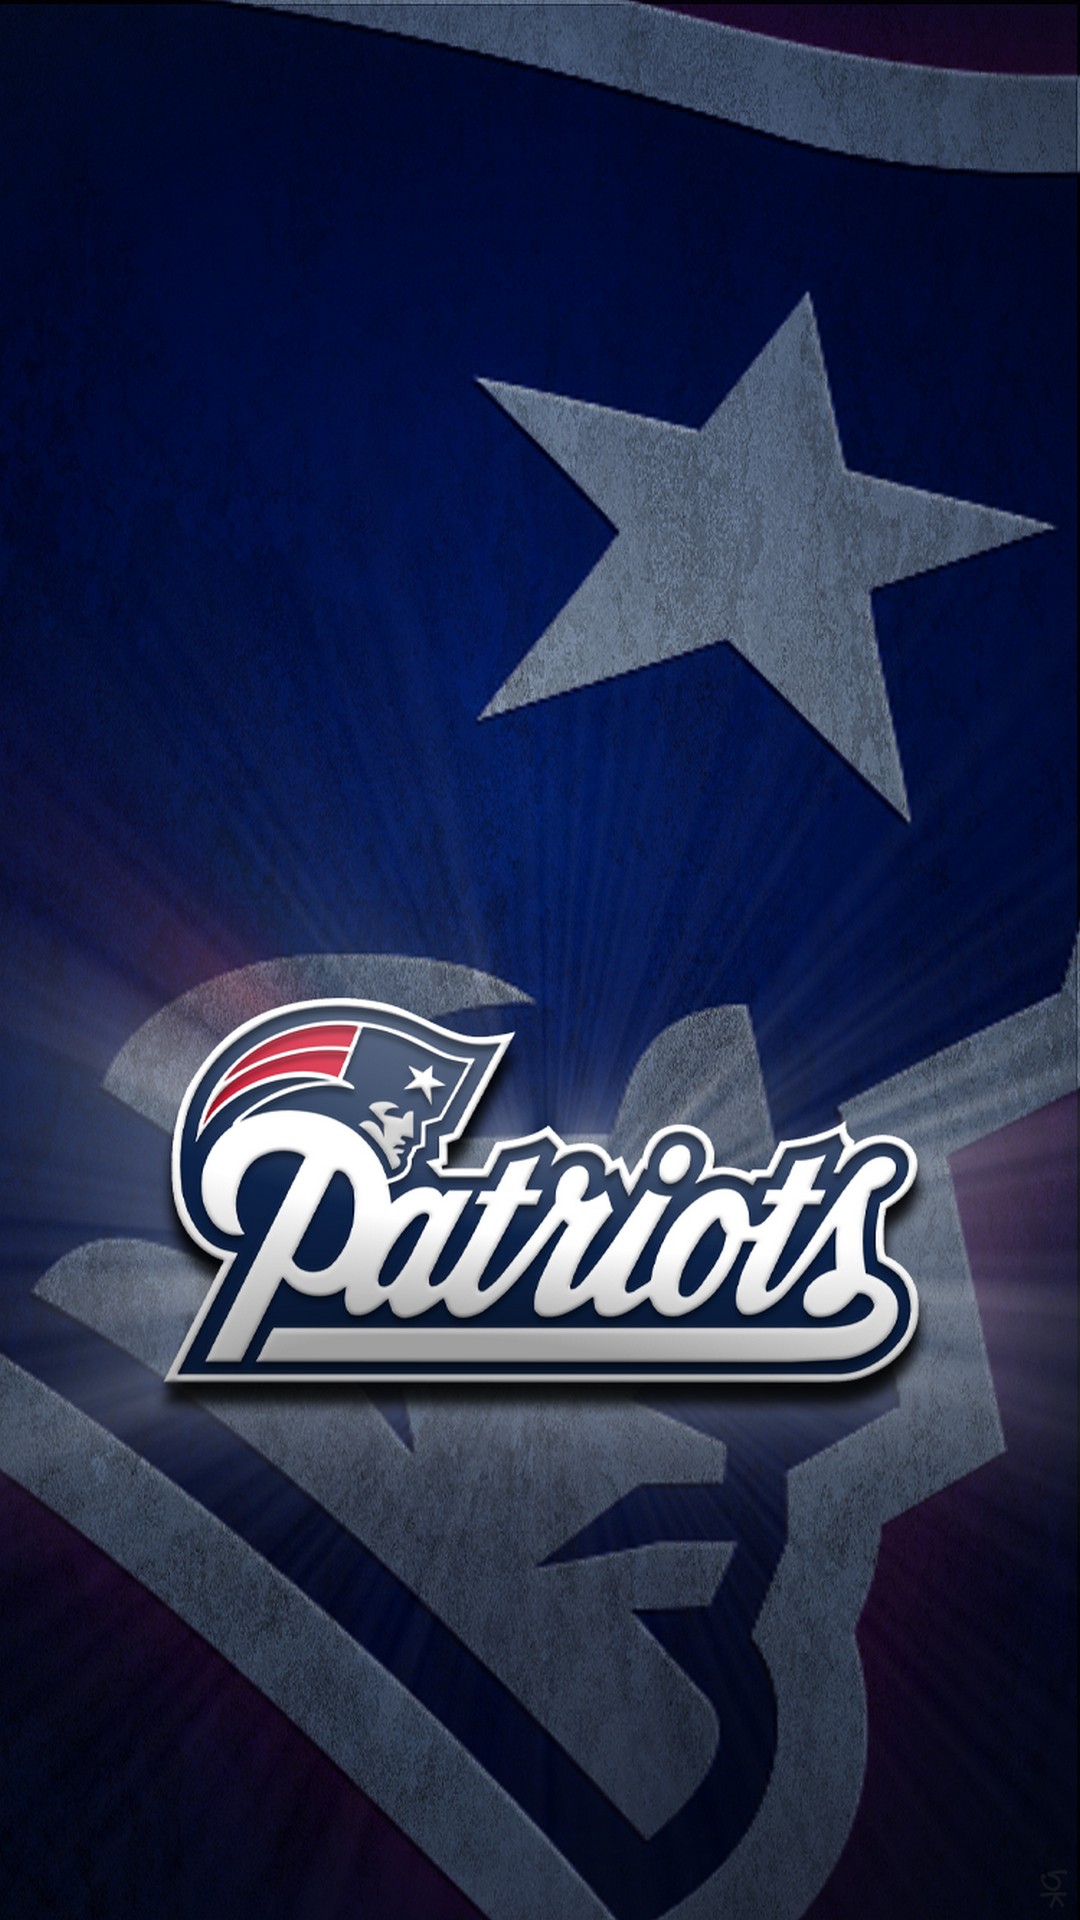 New England Patriots iPhone XR Wallpaper with high-resolution 1080x1920 pixel. Download and set as wallpaper for Apple iPhone X, XS Max, XR, 8, 7, 6, SE, iPad, Android